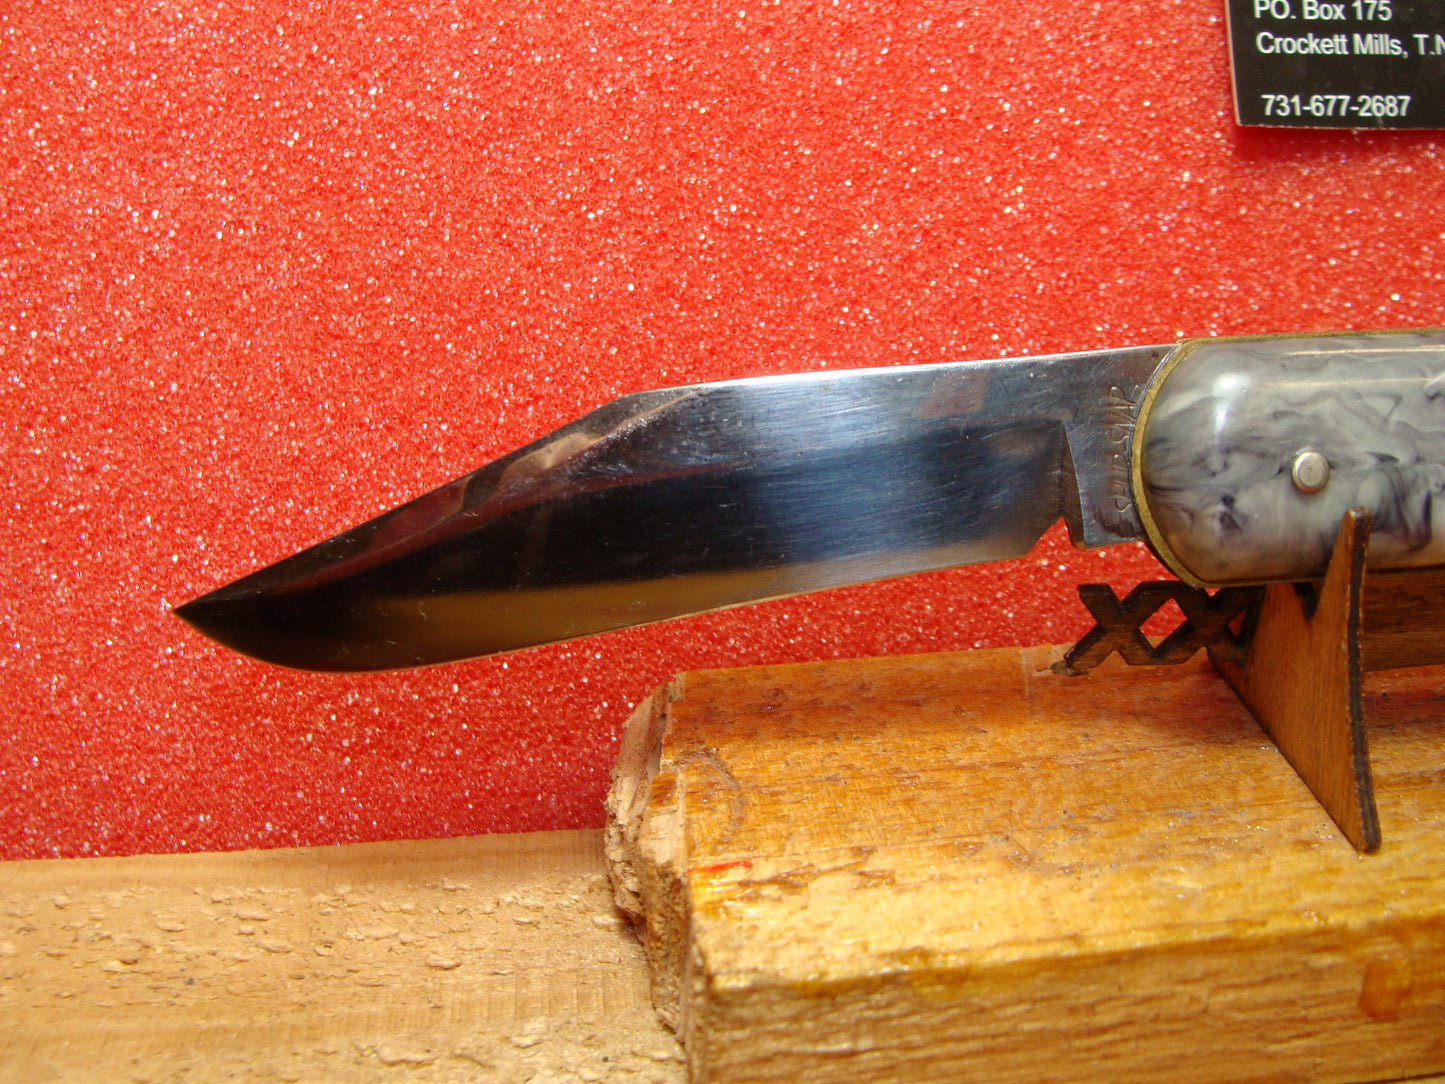 SHUR SNAP COLONIAL KNIFE CO. 1926-56 AMERICAN AUTOMATIC KNIFE 4 1/8" STUBBY JACK PARATROOPER GRAY SWIRL COMPOSITION HANDLES